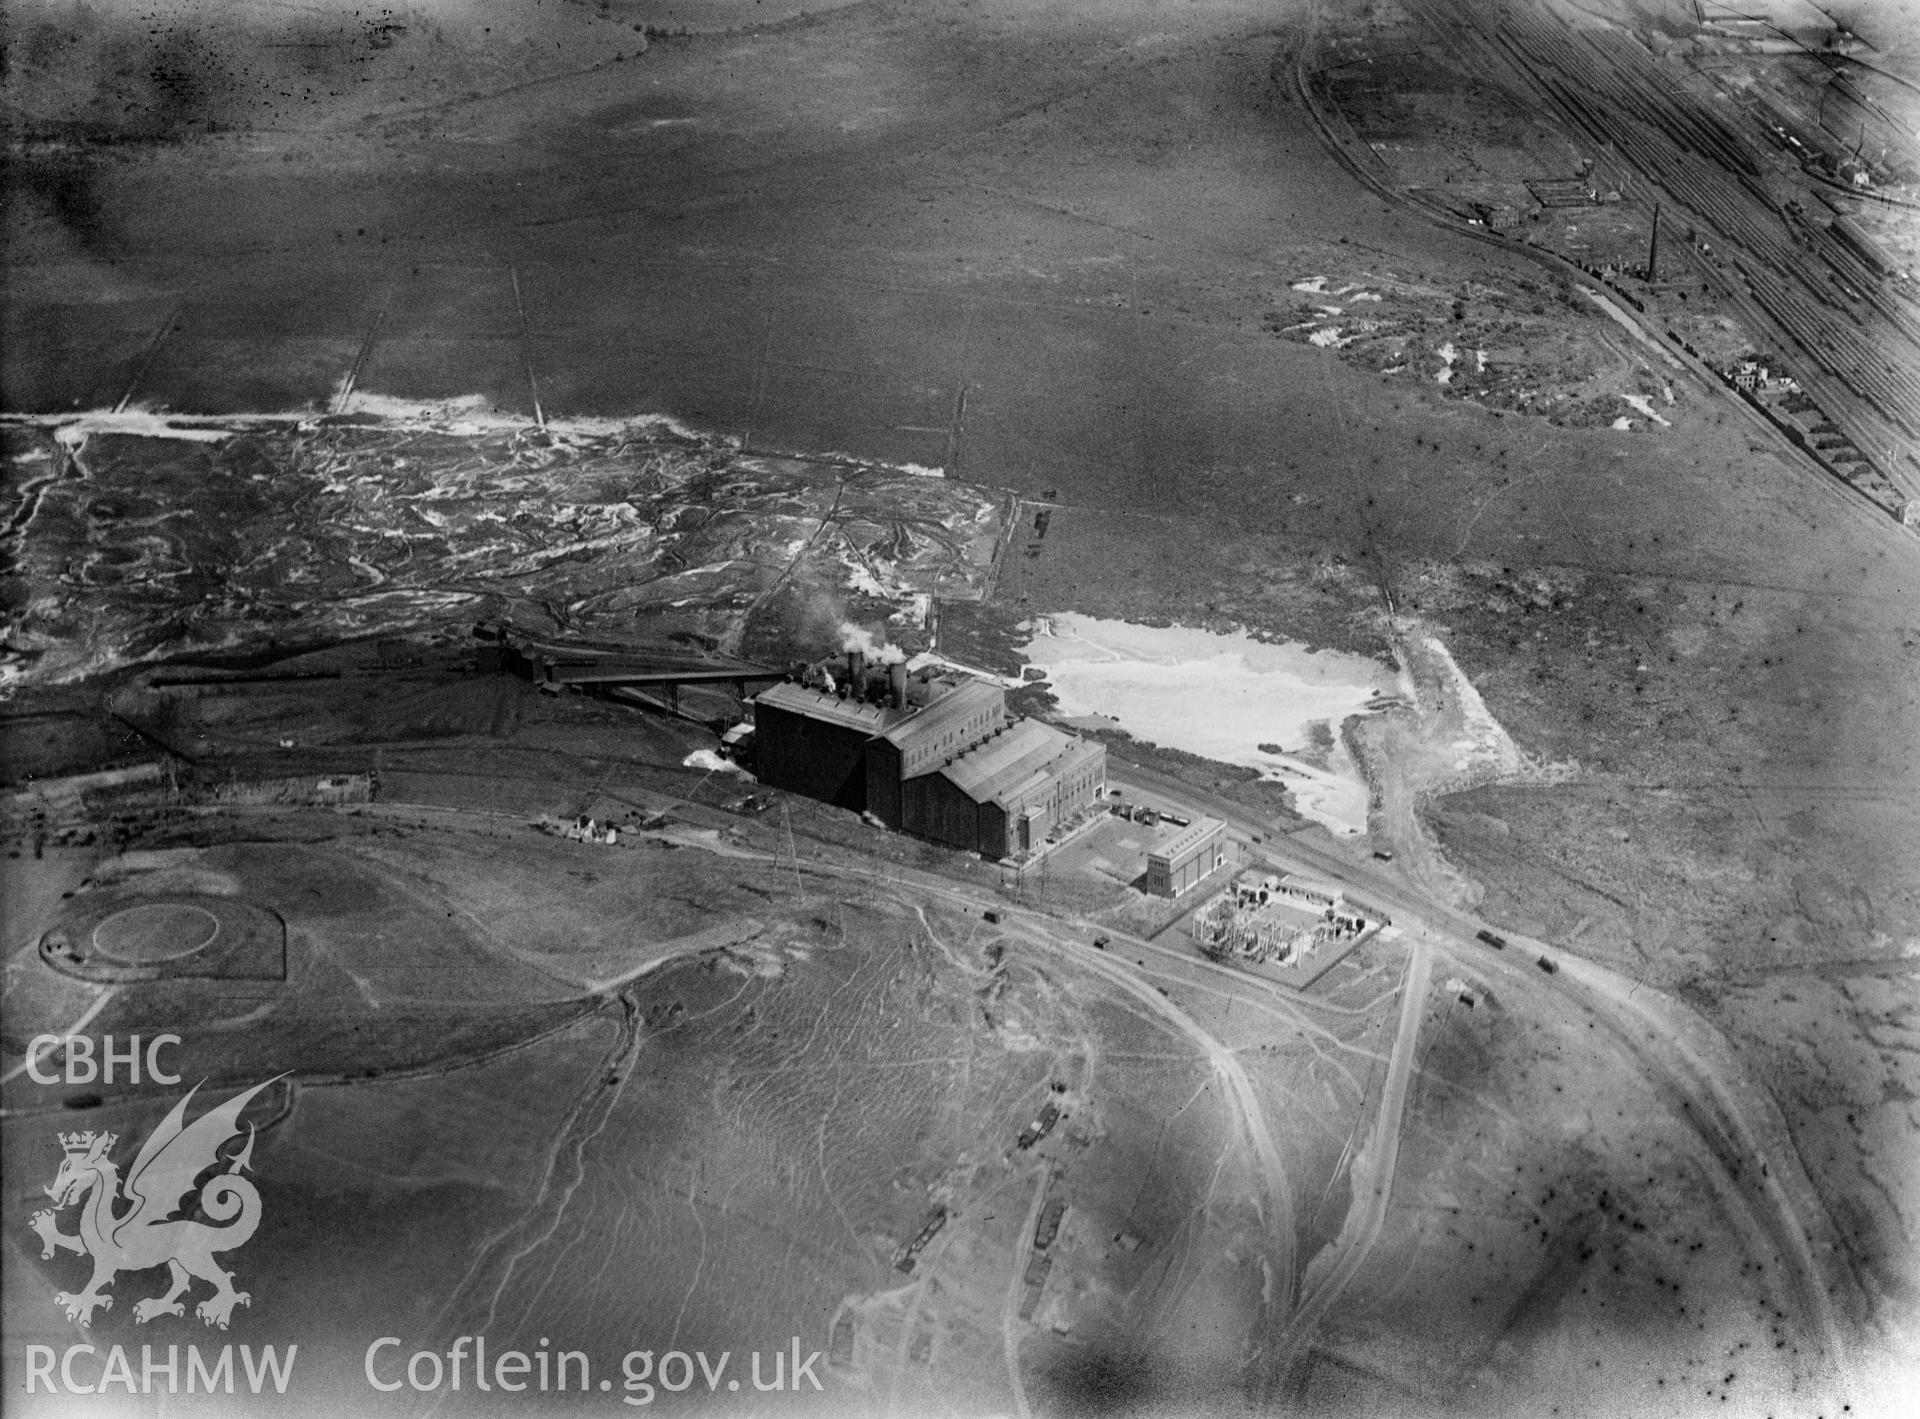 Distant view of Tir John power station, Swansea, oblique aerial view. 5?x4? black and white glass plate negative.